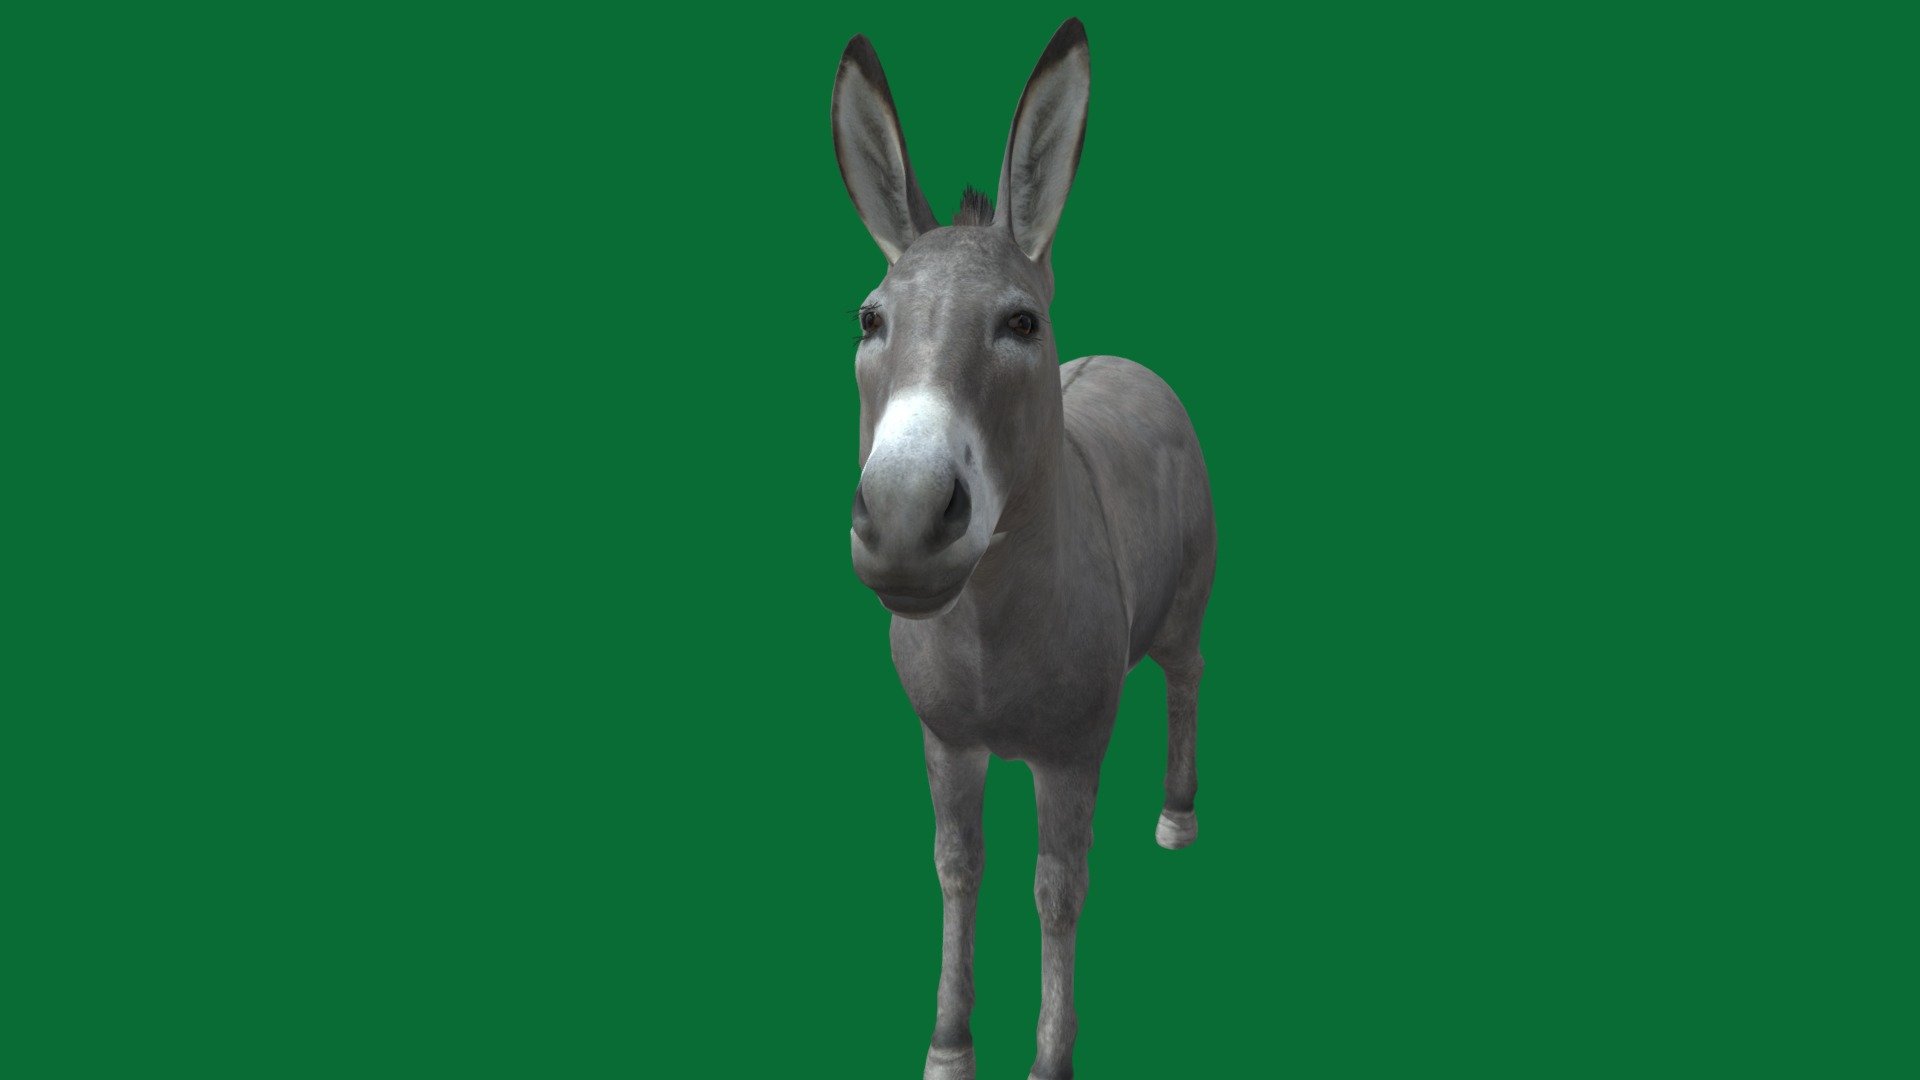 The donkey is a domesticated subspecies of the ass, and member of the horse family. It derives from the African wild ass, Equus africanus, and has been used as a working animal for at least 5000 years. Wikipedia
Family: Equidae
Phylum: Chordata
Order: Perissodactyla
Kingdom: Animalia


armyanmar #nyi
Sound 🔊 and custom animation 
Contact me for more at Facebook -


        
      
https://instagram.com/nyi_nyi_tun_burma_?r=nametag - Donkey - 3D model by Nyilonelycompany 3d model